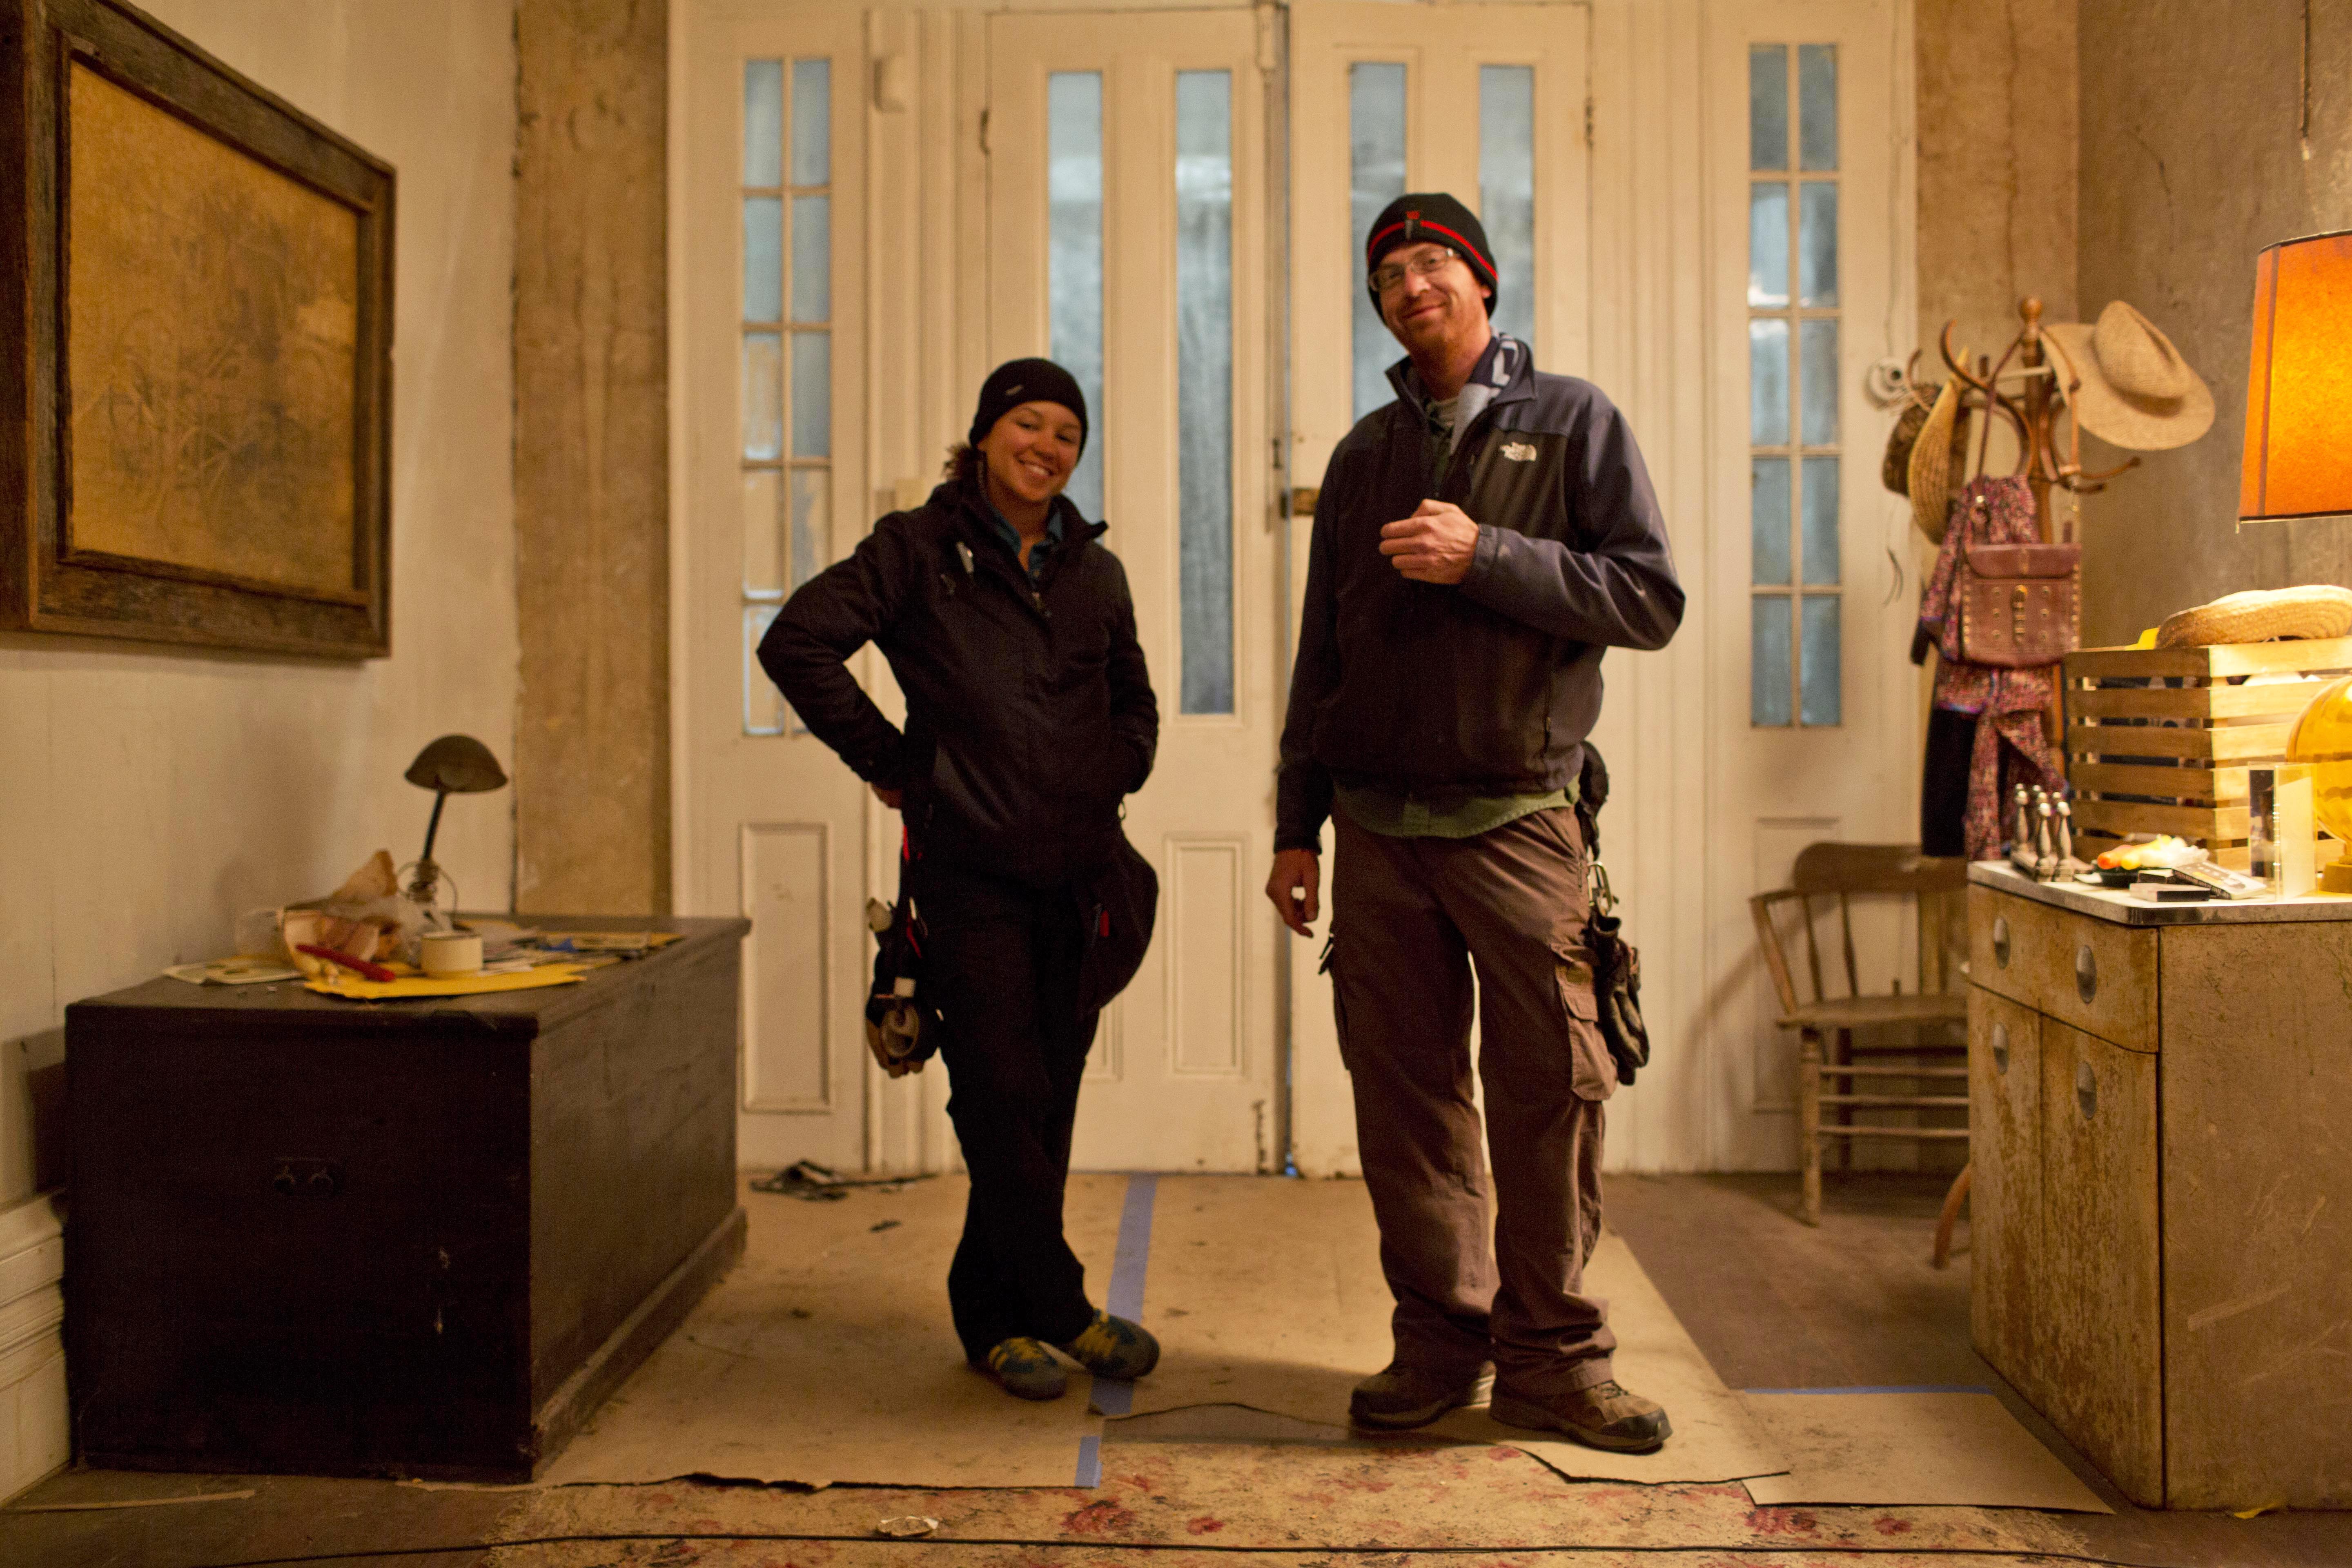 Trenton McRae - Gaffer with Lamp Operator - Stephanie Sosa On the set of Kidnap, staring Halle Berry